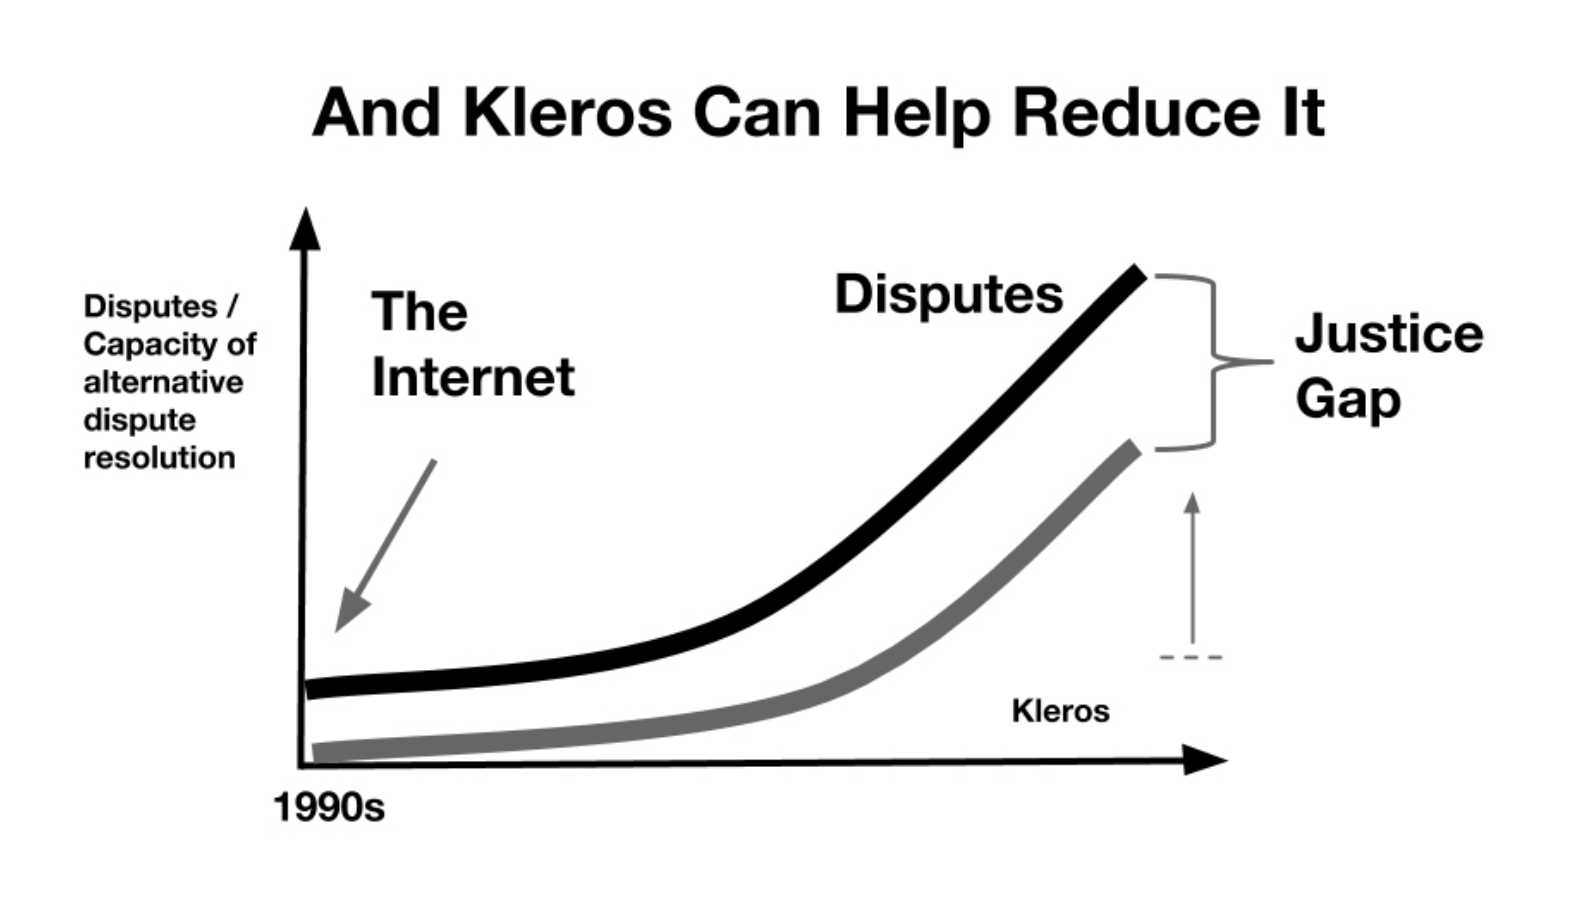 Figure 2. By using blockchain and cryptoeconomic incentives, Kleros can greatly increase the capacity for dispute resolution and keep up with the rising disputes of the internet age.